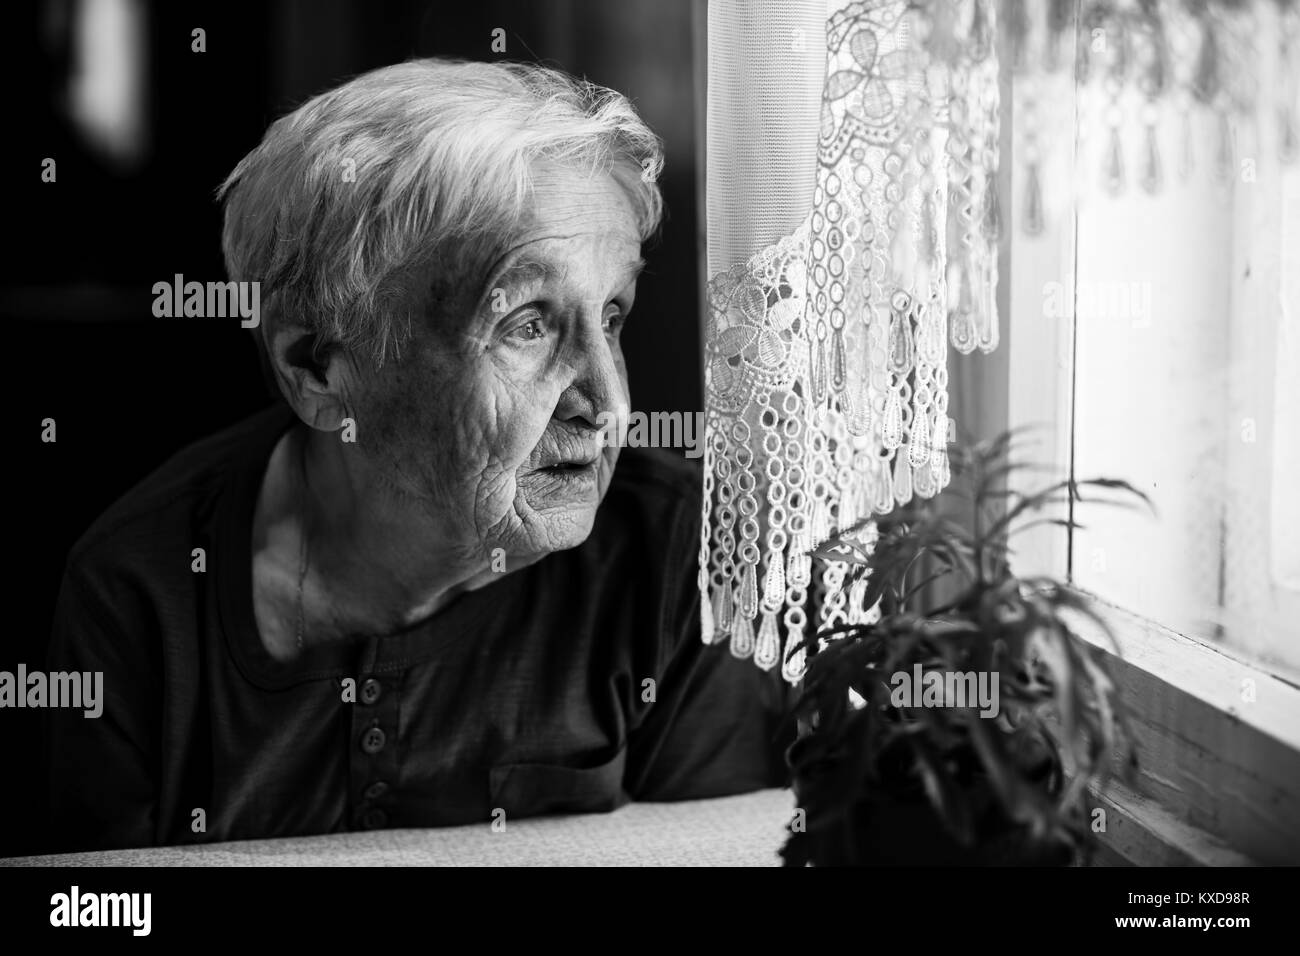 Elderly woman looking sad out the window. Stock Photo